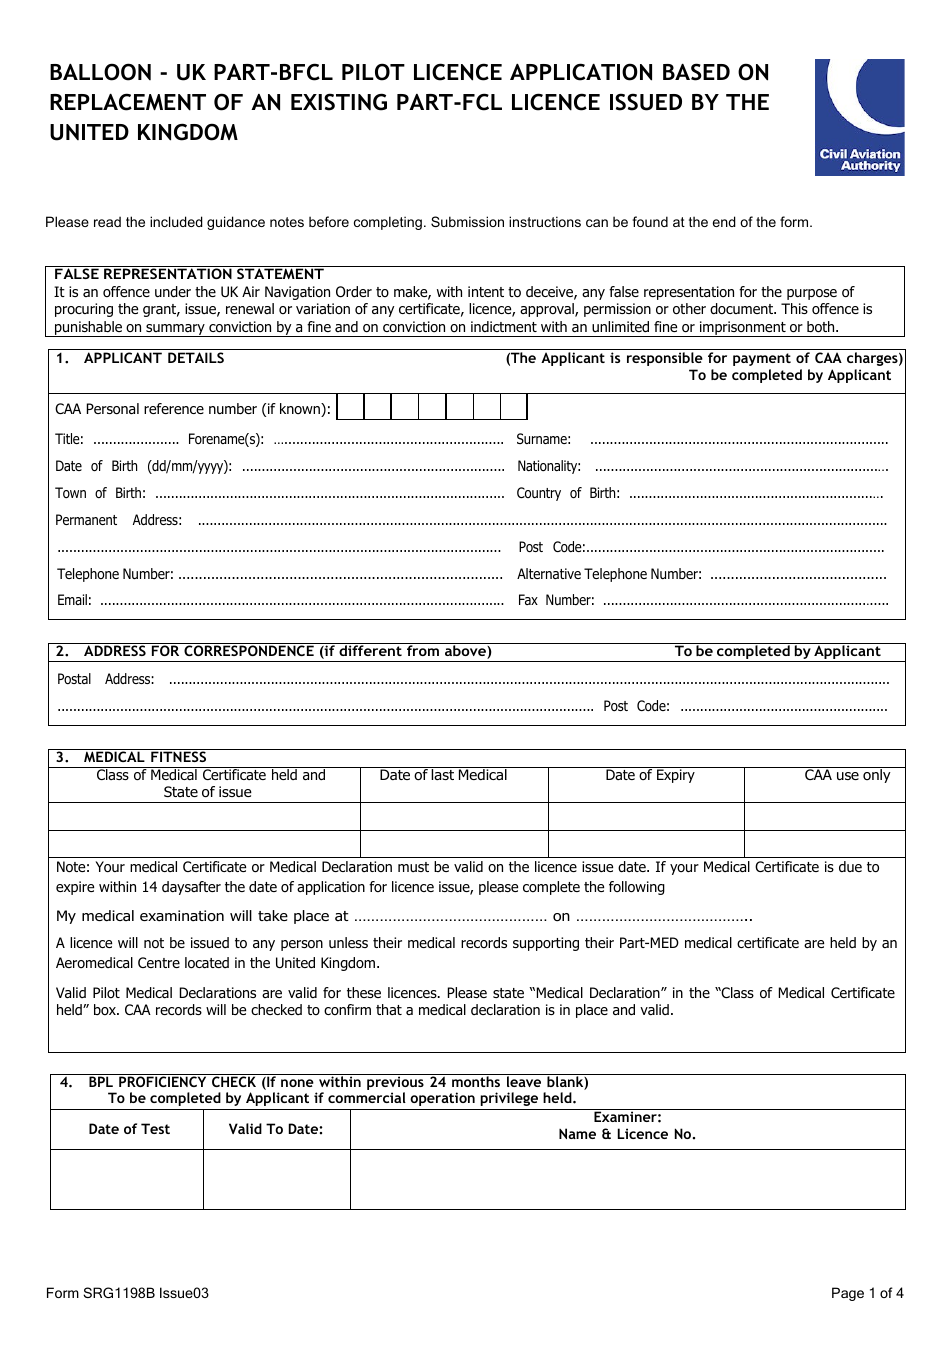 Form SRG1198B Balloon - UK Part-Bfcl Pilot Licence Application Based on Replacement of an Existing Part-Fcl Licence Issued by the United Kingdom - United Kingdom, Page 1